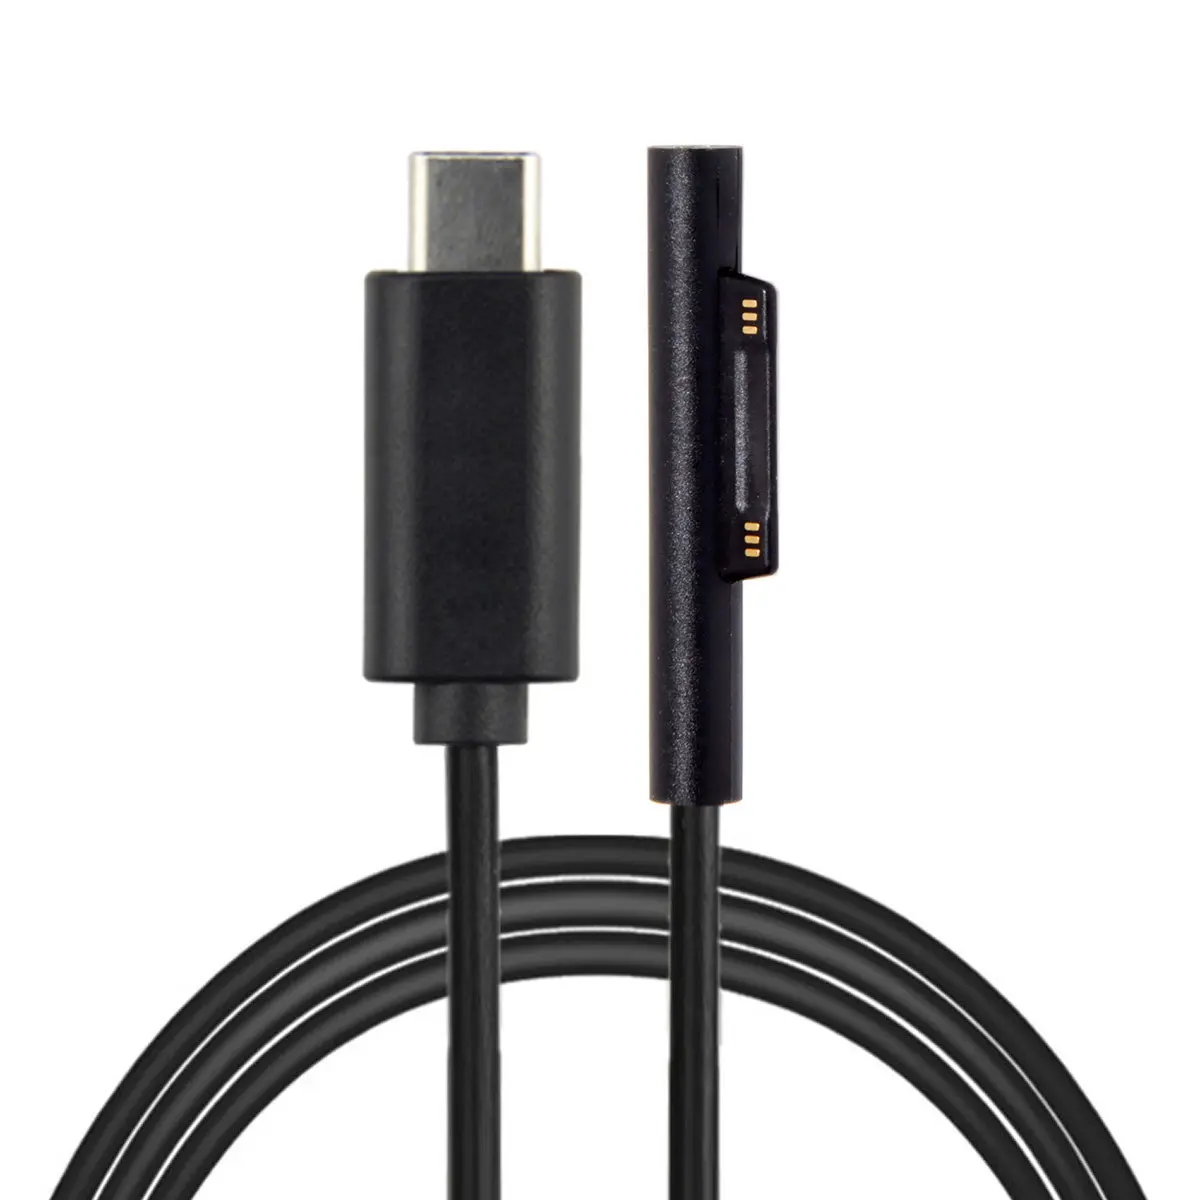 

CY USB 3.1 Type C USB-C DC 12-15V to Surface Pro3 Pro4 Pro5 Pro6 Book Charge Cable 1.8m